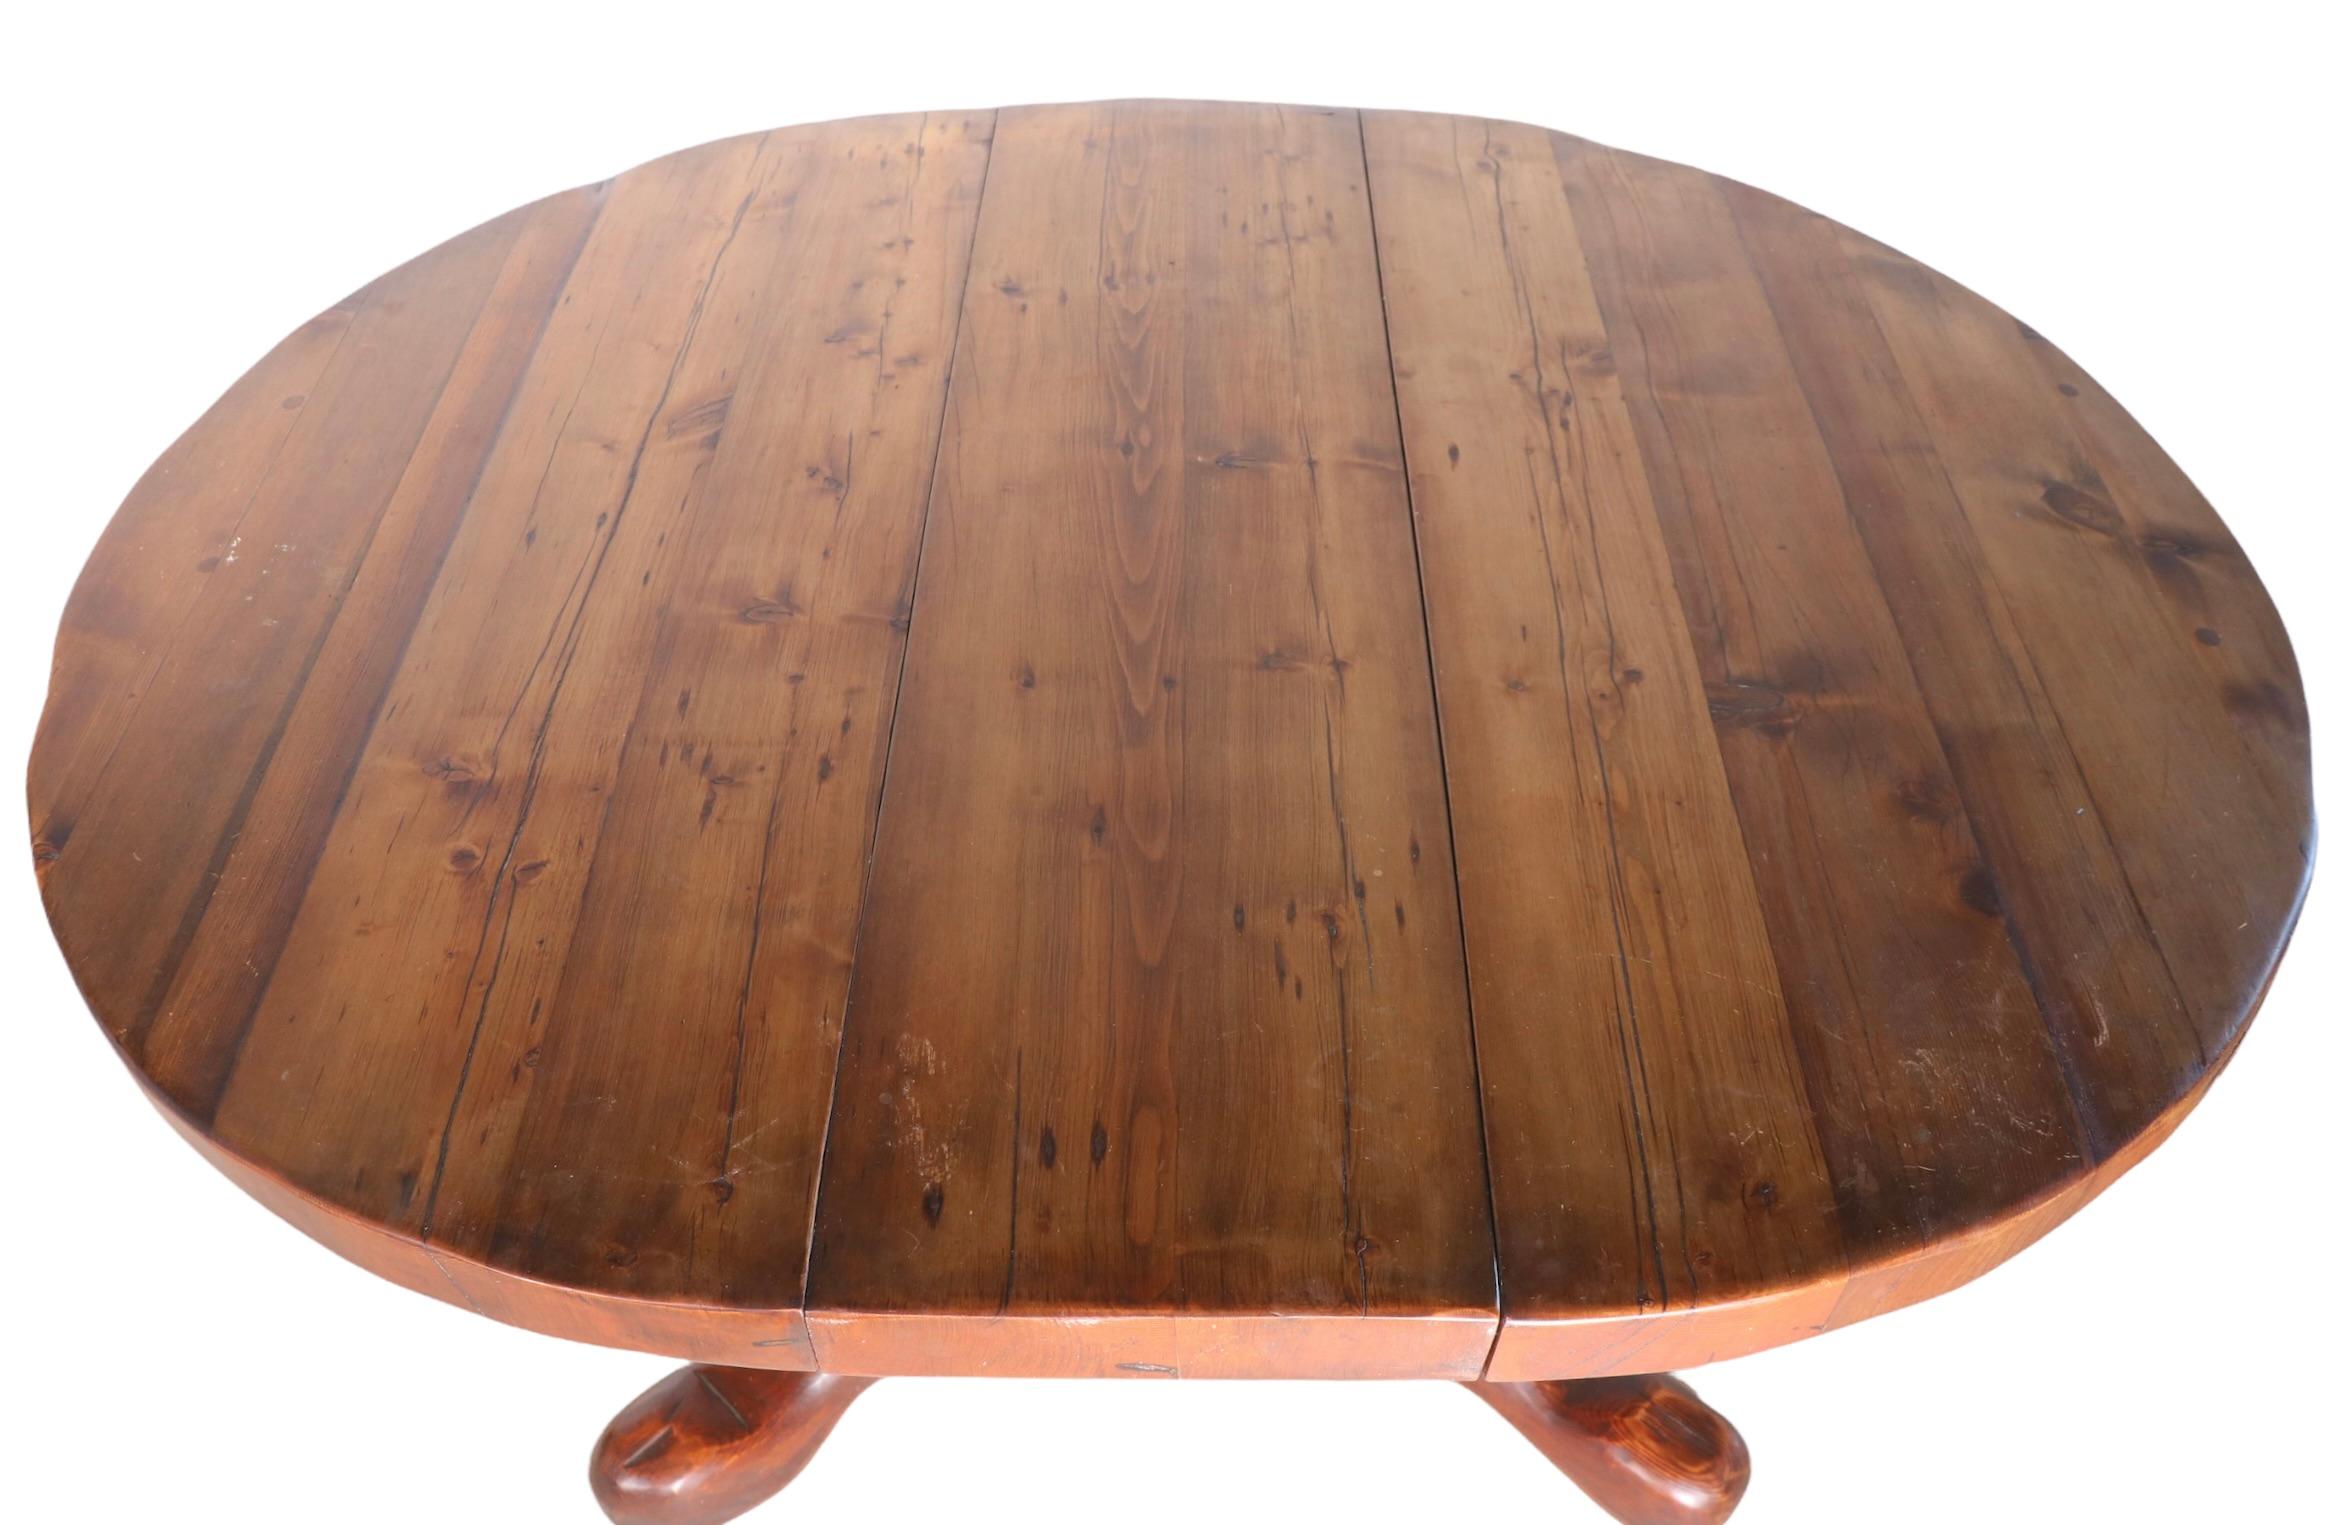 Unique Hand Made Rustic Brutalist Arts and Crafts Dining Table Solid Pine 1970s For Sale 11